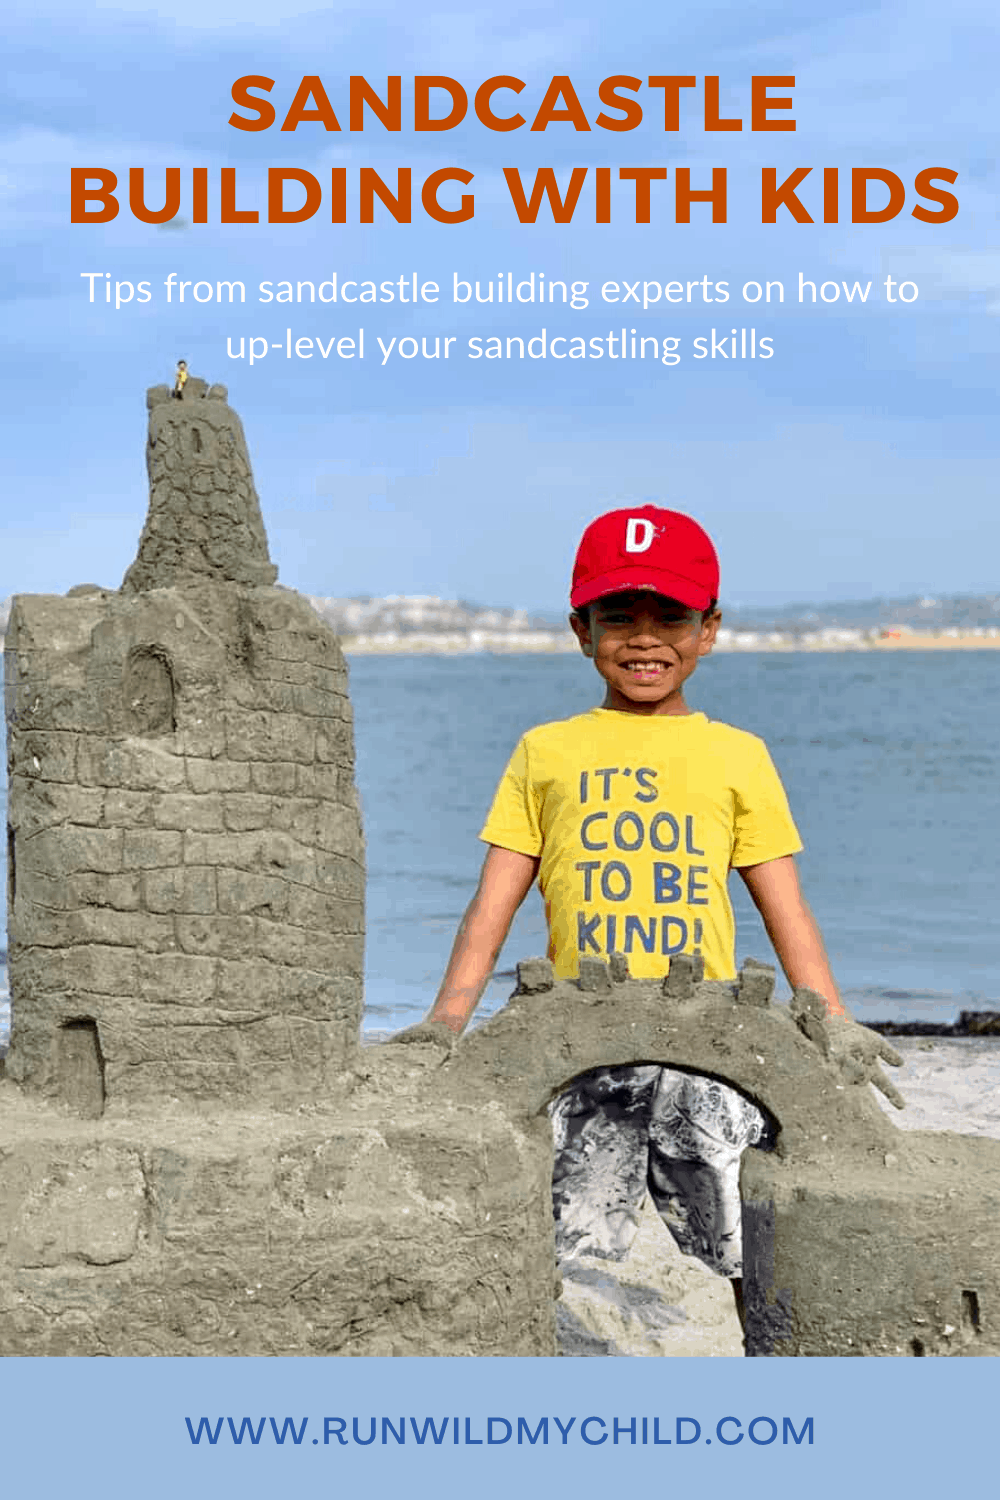 Tips from Experts on Sandcastle Building with Kids